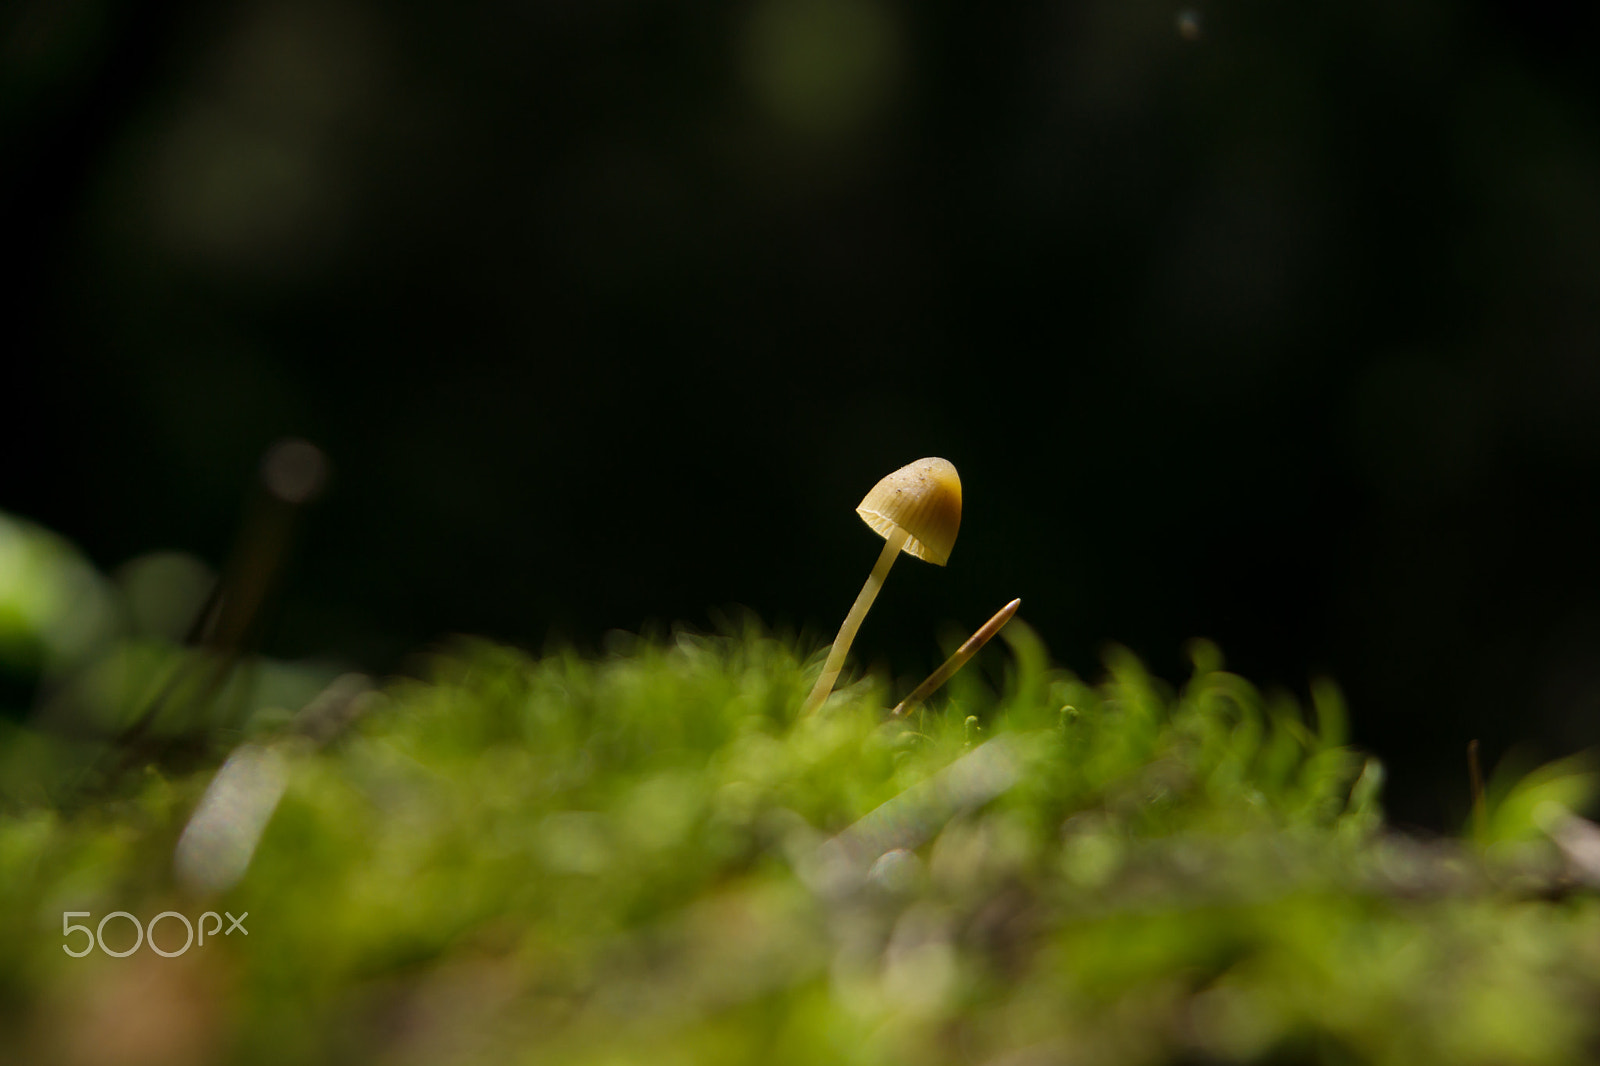 Sony SLT-A65 (SLT-A65V) sample photo. Small lamellar mushroom on a green moss in a dark forest, lit by a sunbeam, tilted to the right photography